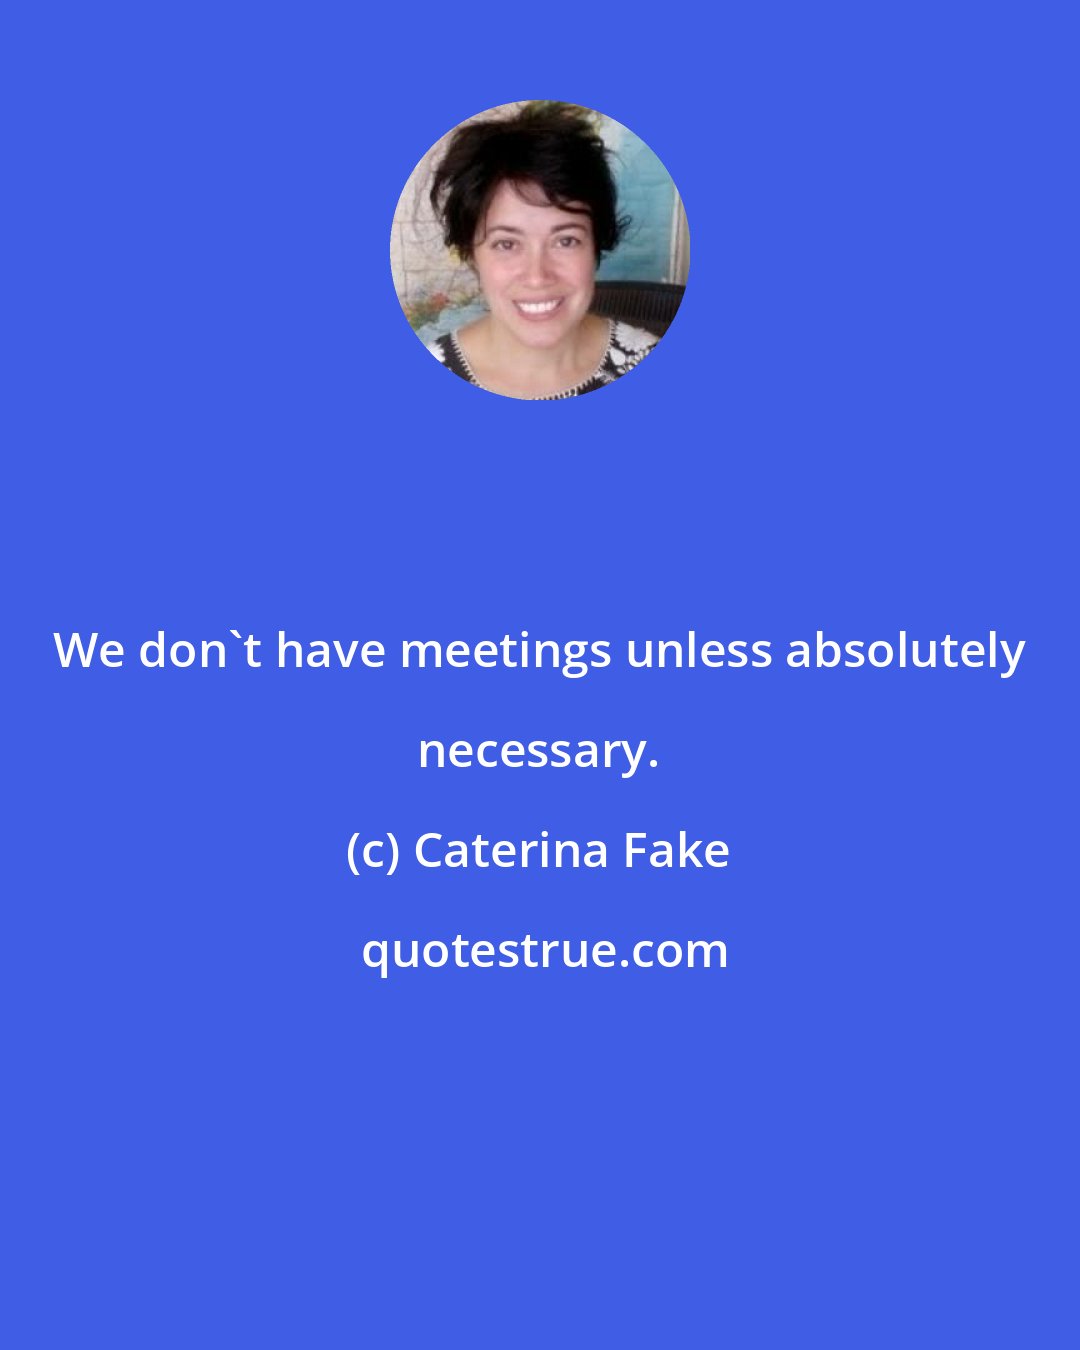 Caterina Fake: We don't have meetings unless absolutely necessary.